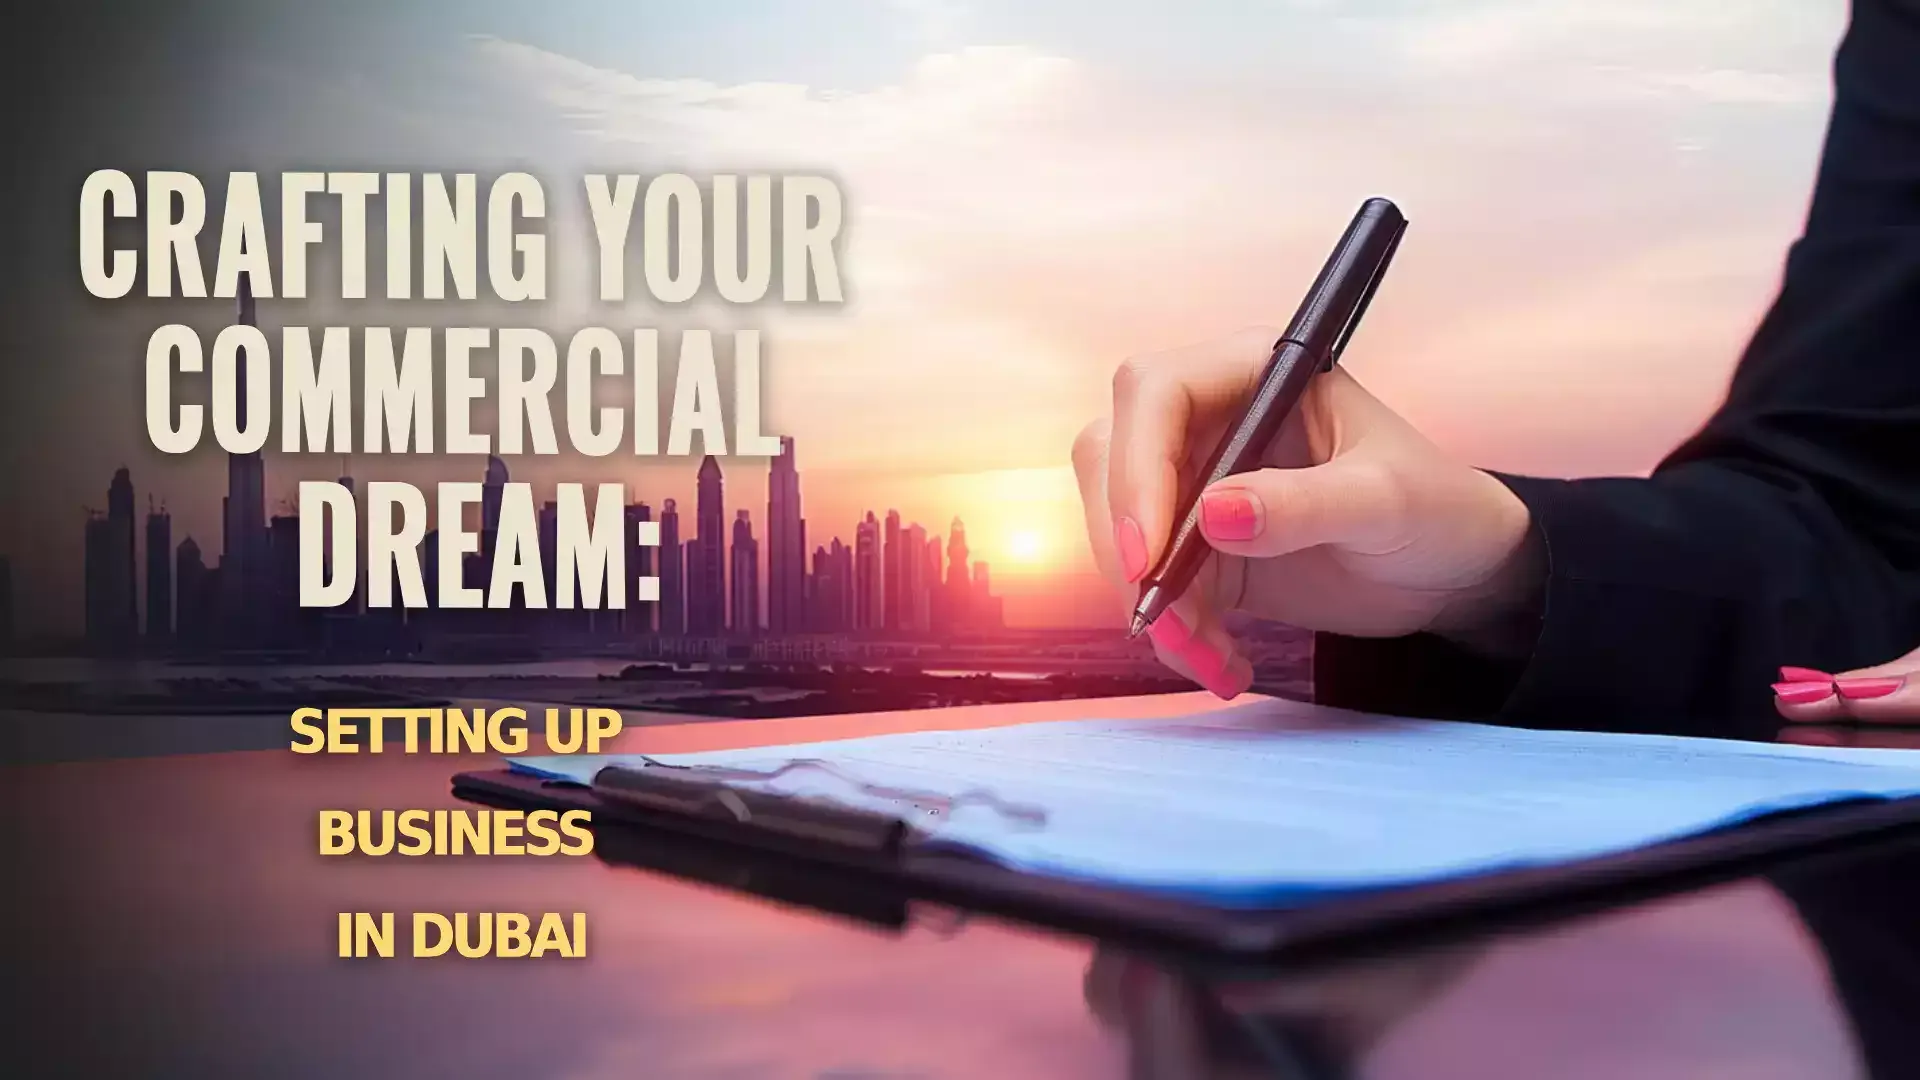 Image showing the process of setting up a business in Dubai, featuring steps and strategies for success